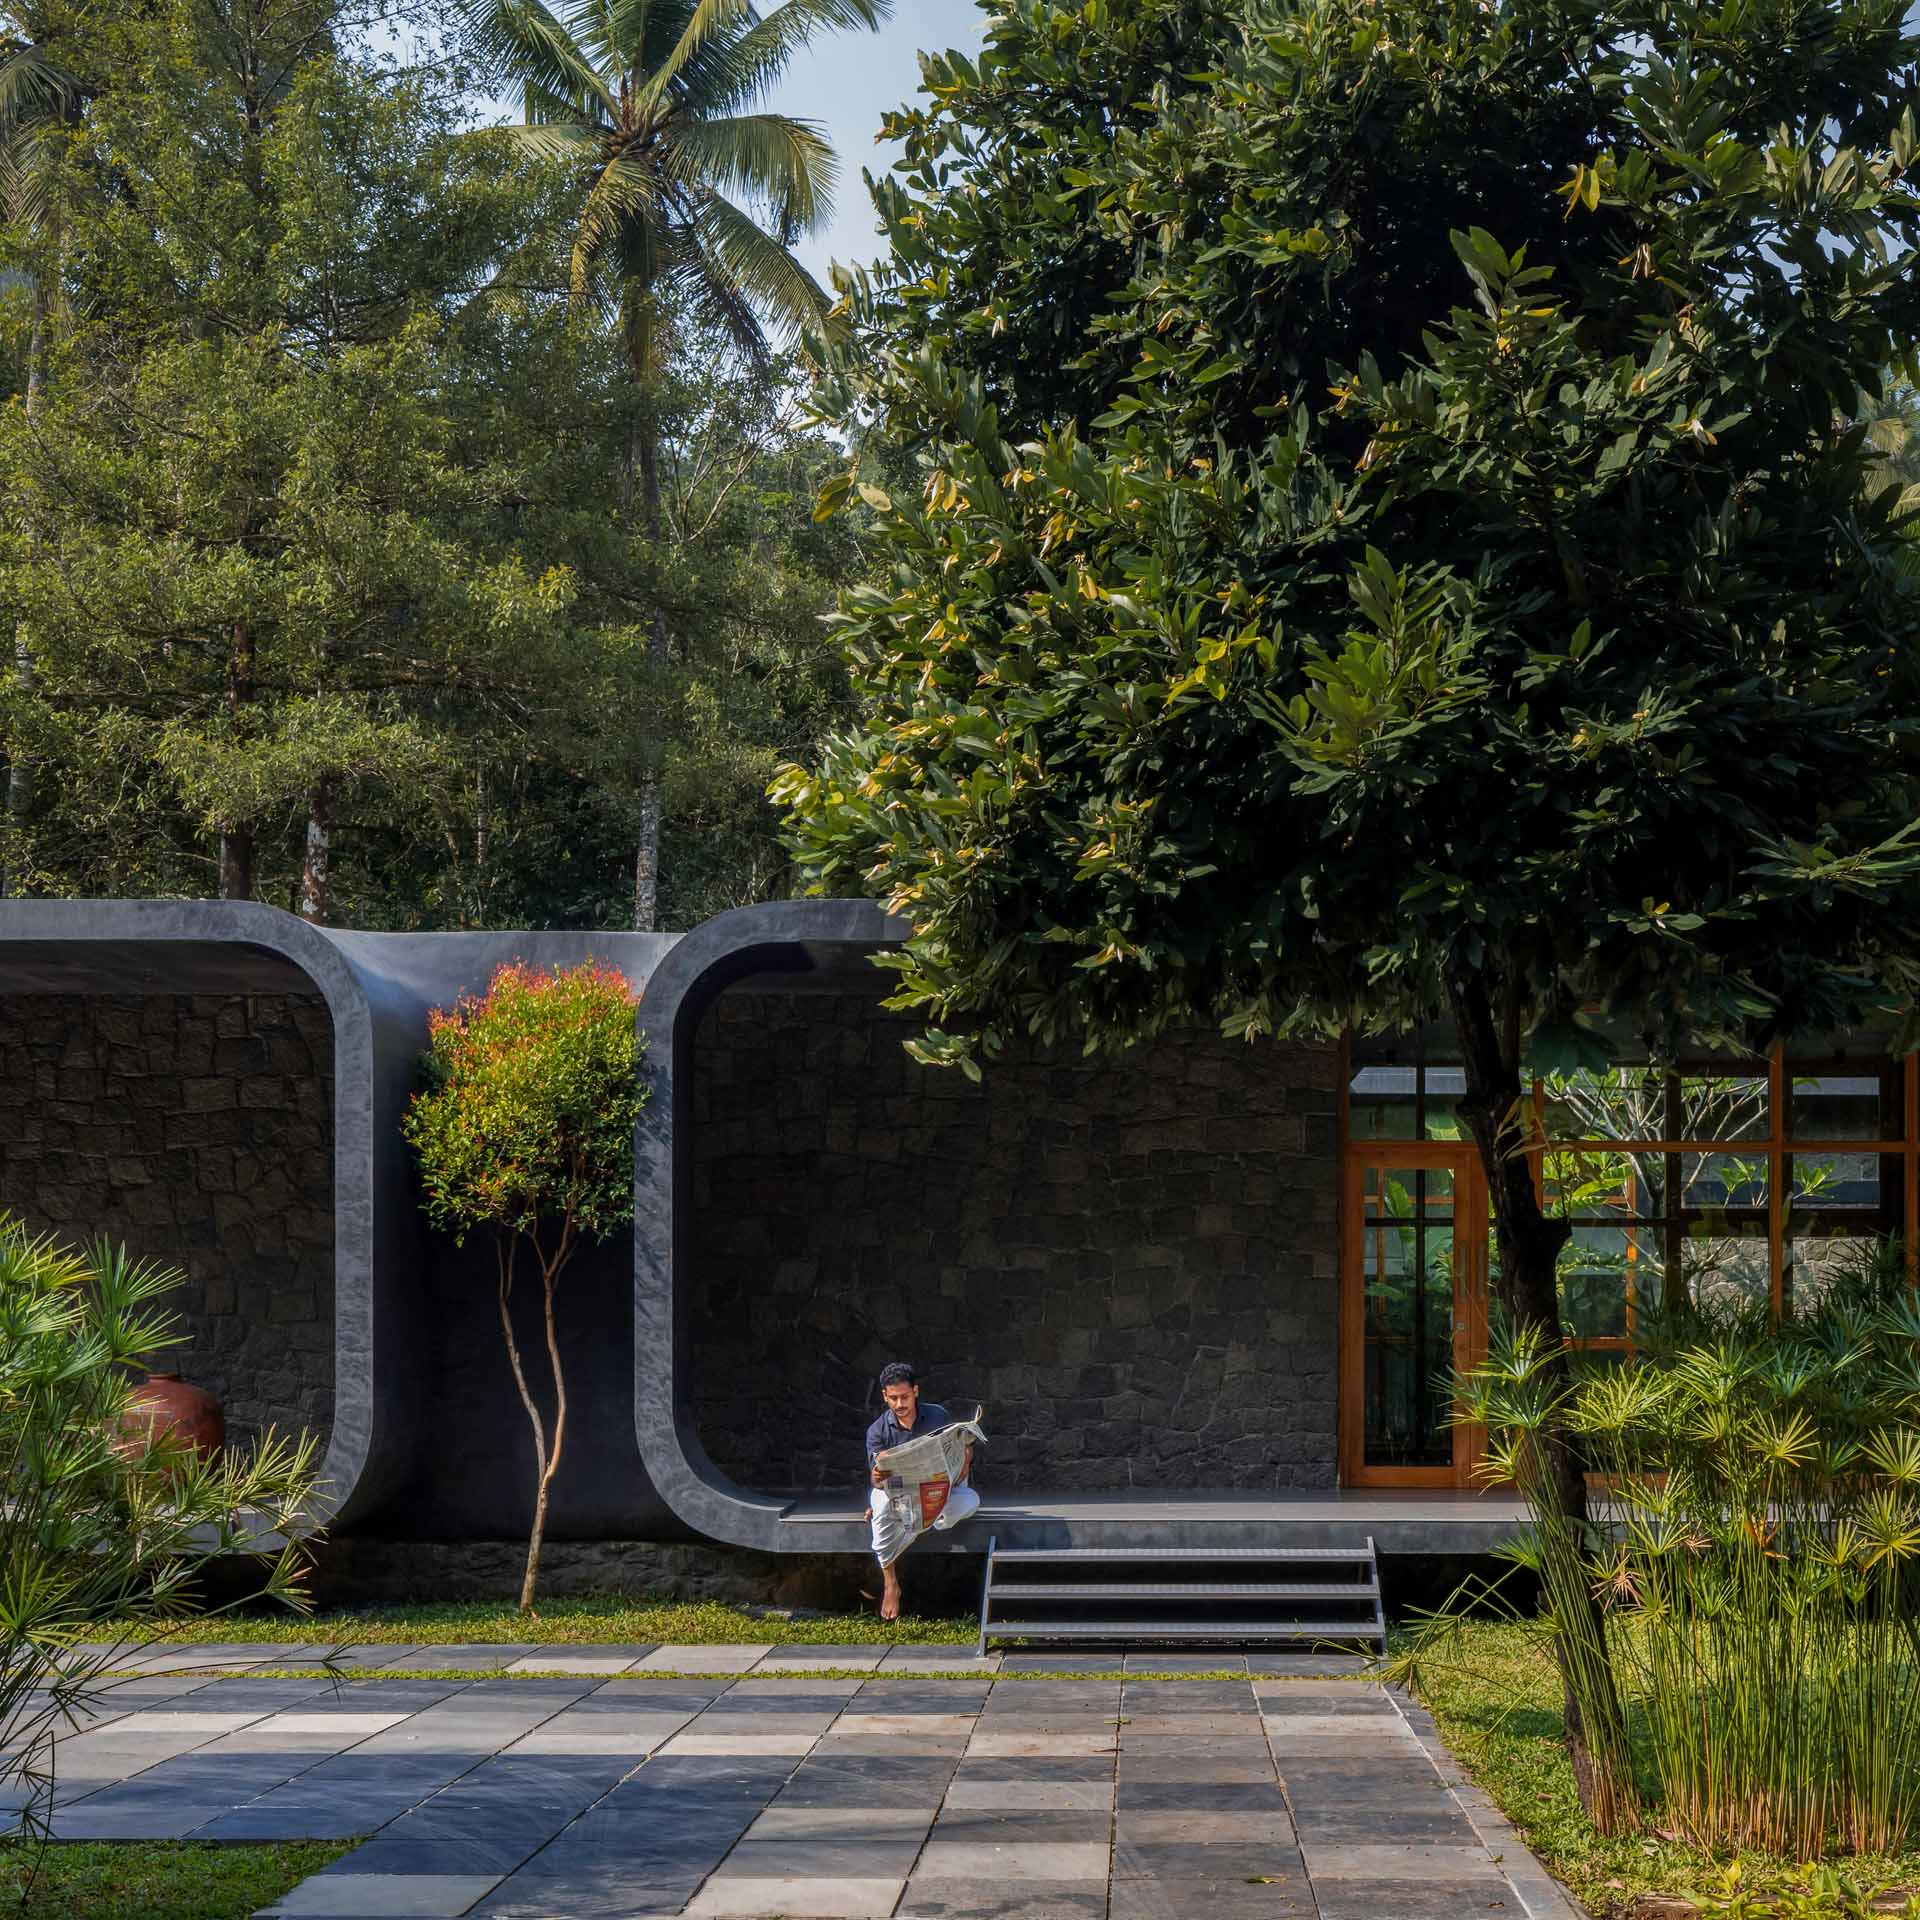 The site's lush surroundings and dense vegetation inspired the design of this home, which has two C shapes that mirror each other, with a tree acting as the focal point.